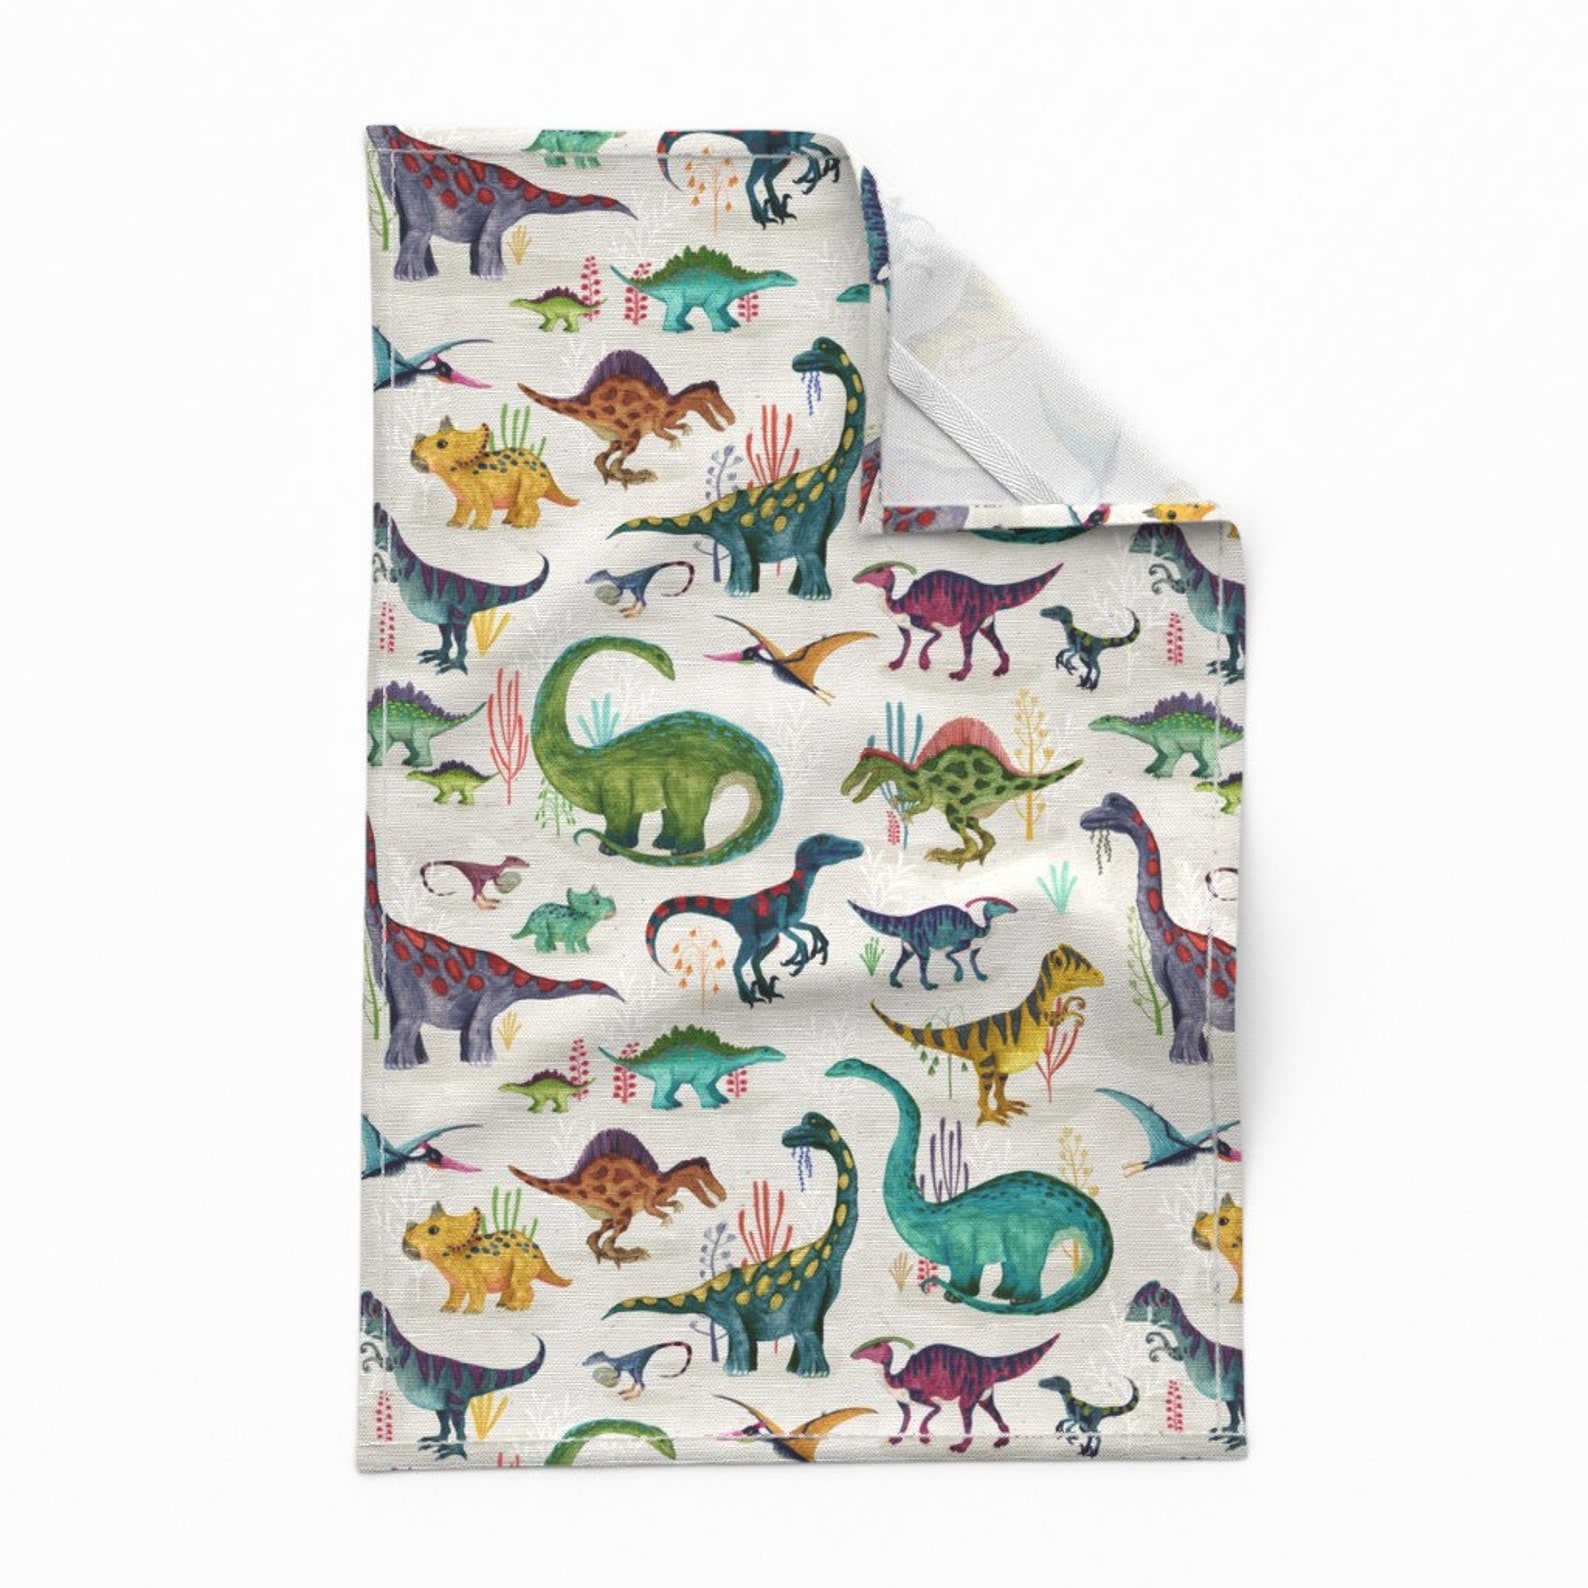 Dinos Tea Towels set of 2 Dinosaurs Bright Large by - Etsy